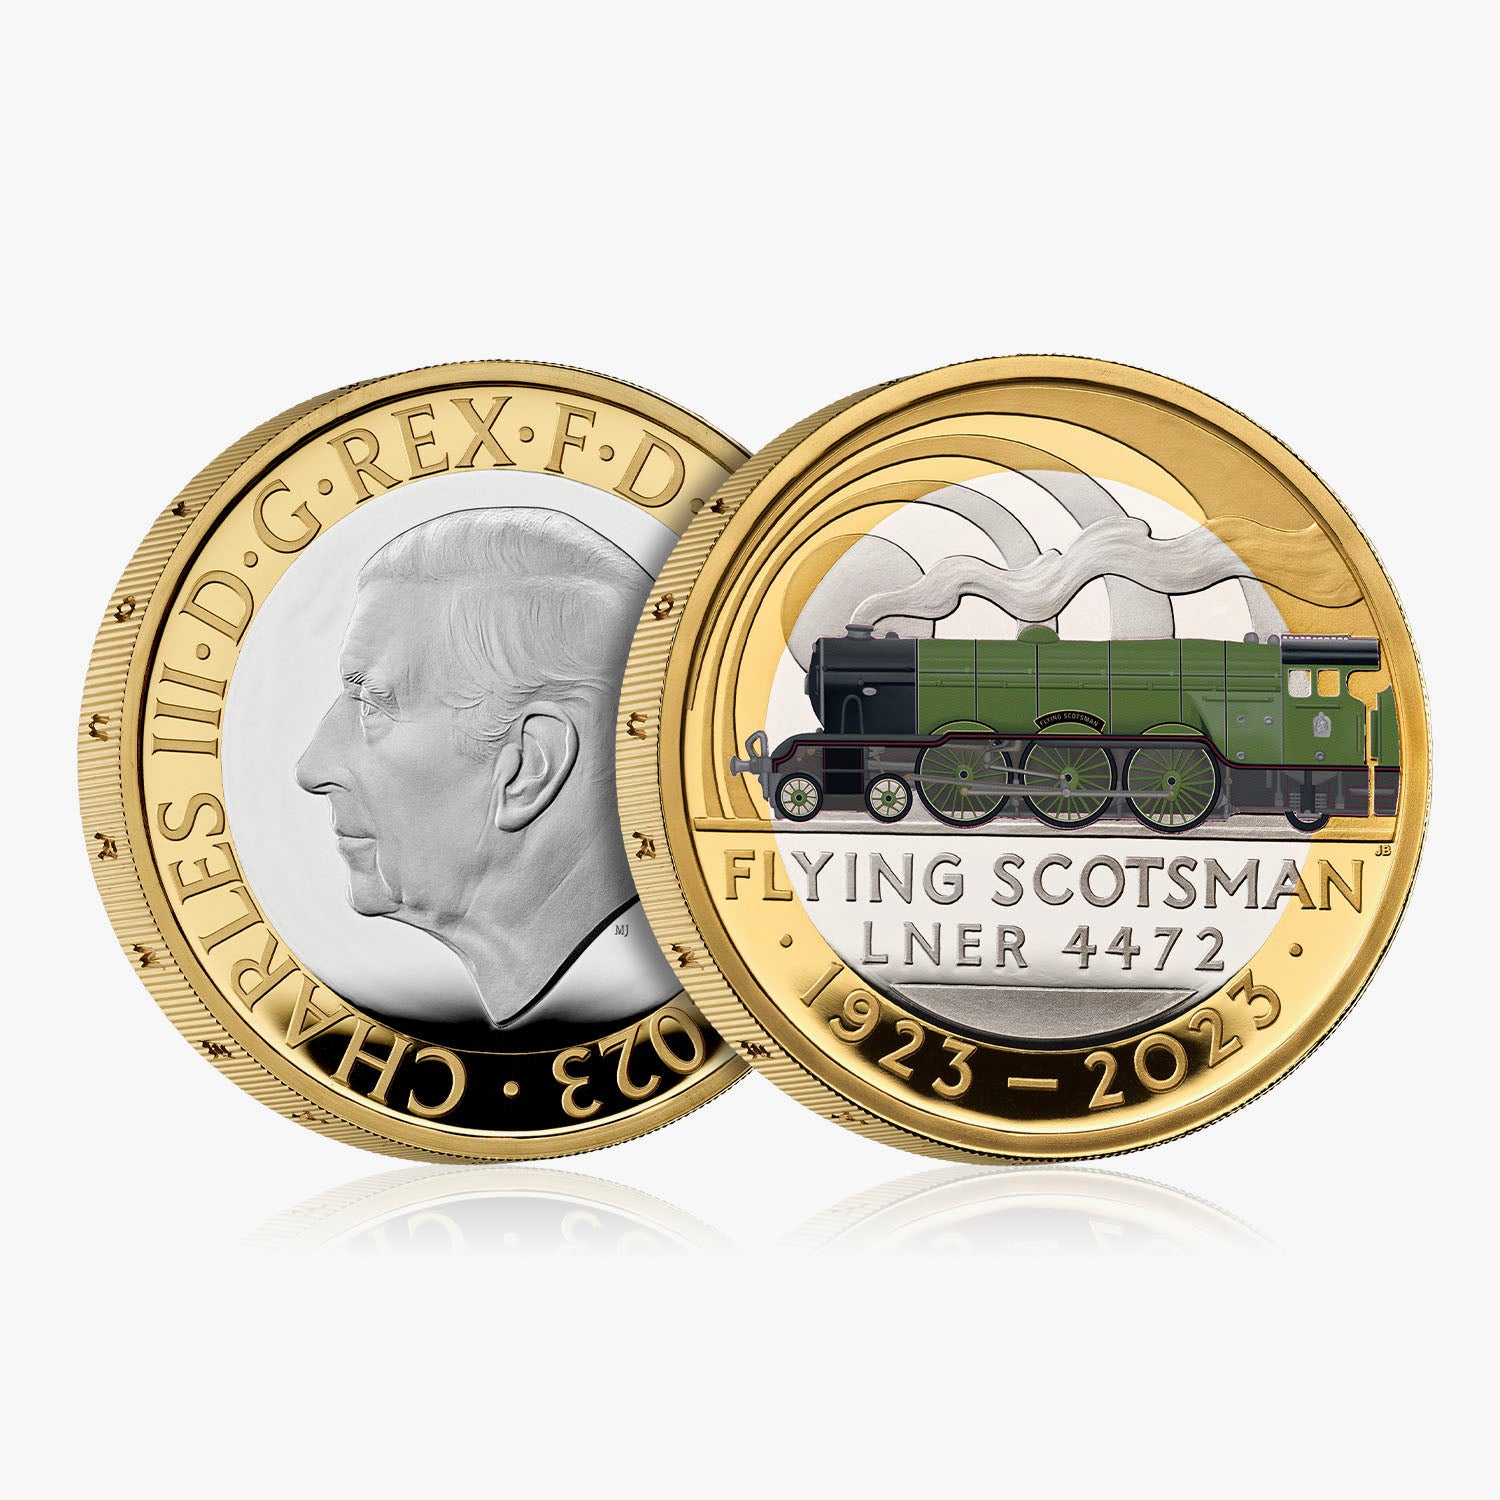 The Centenary of Flying Scotsman 2023 UK £2 Silver Proof Coin